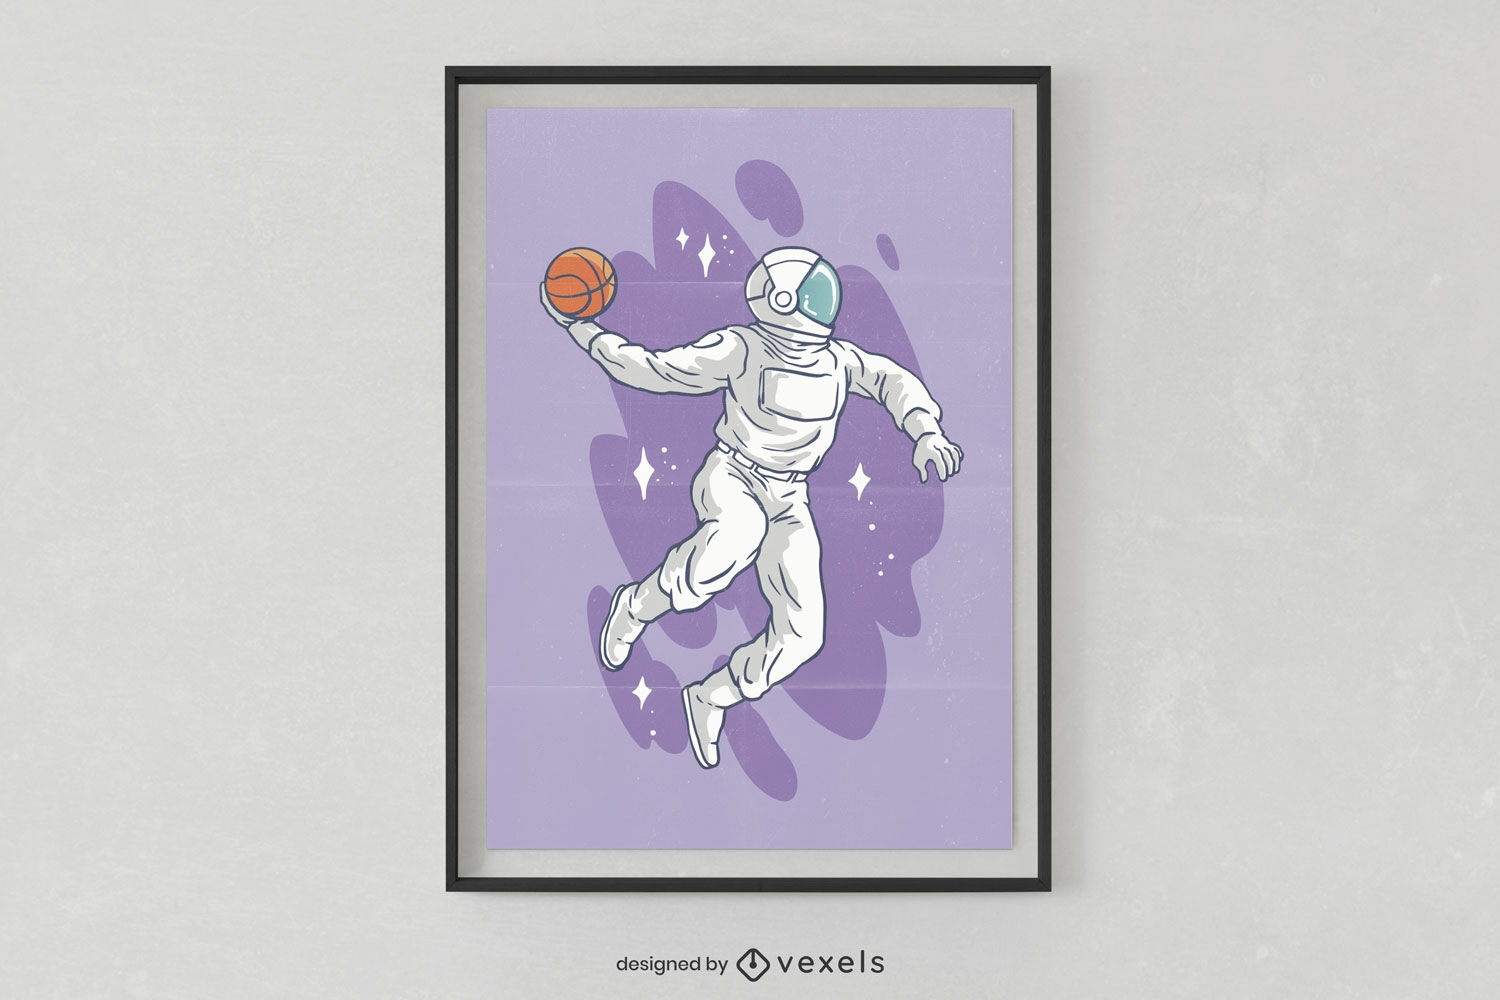 Poster with an astronaut playing basketball